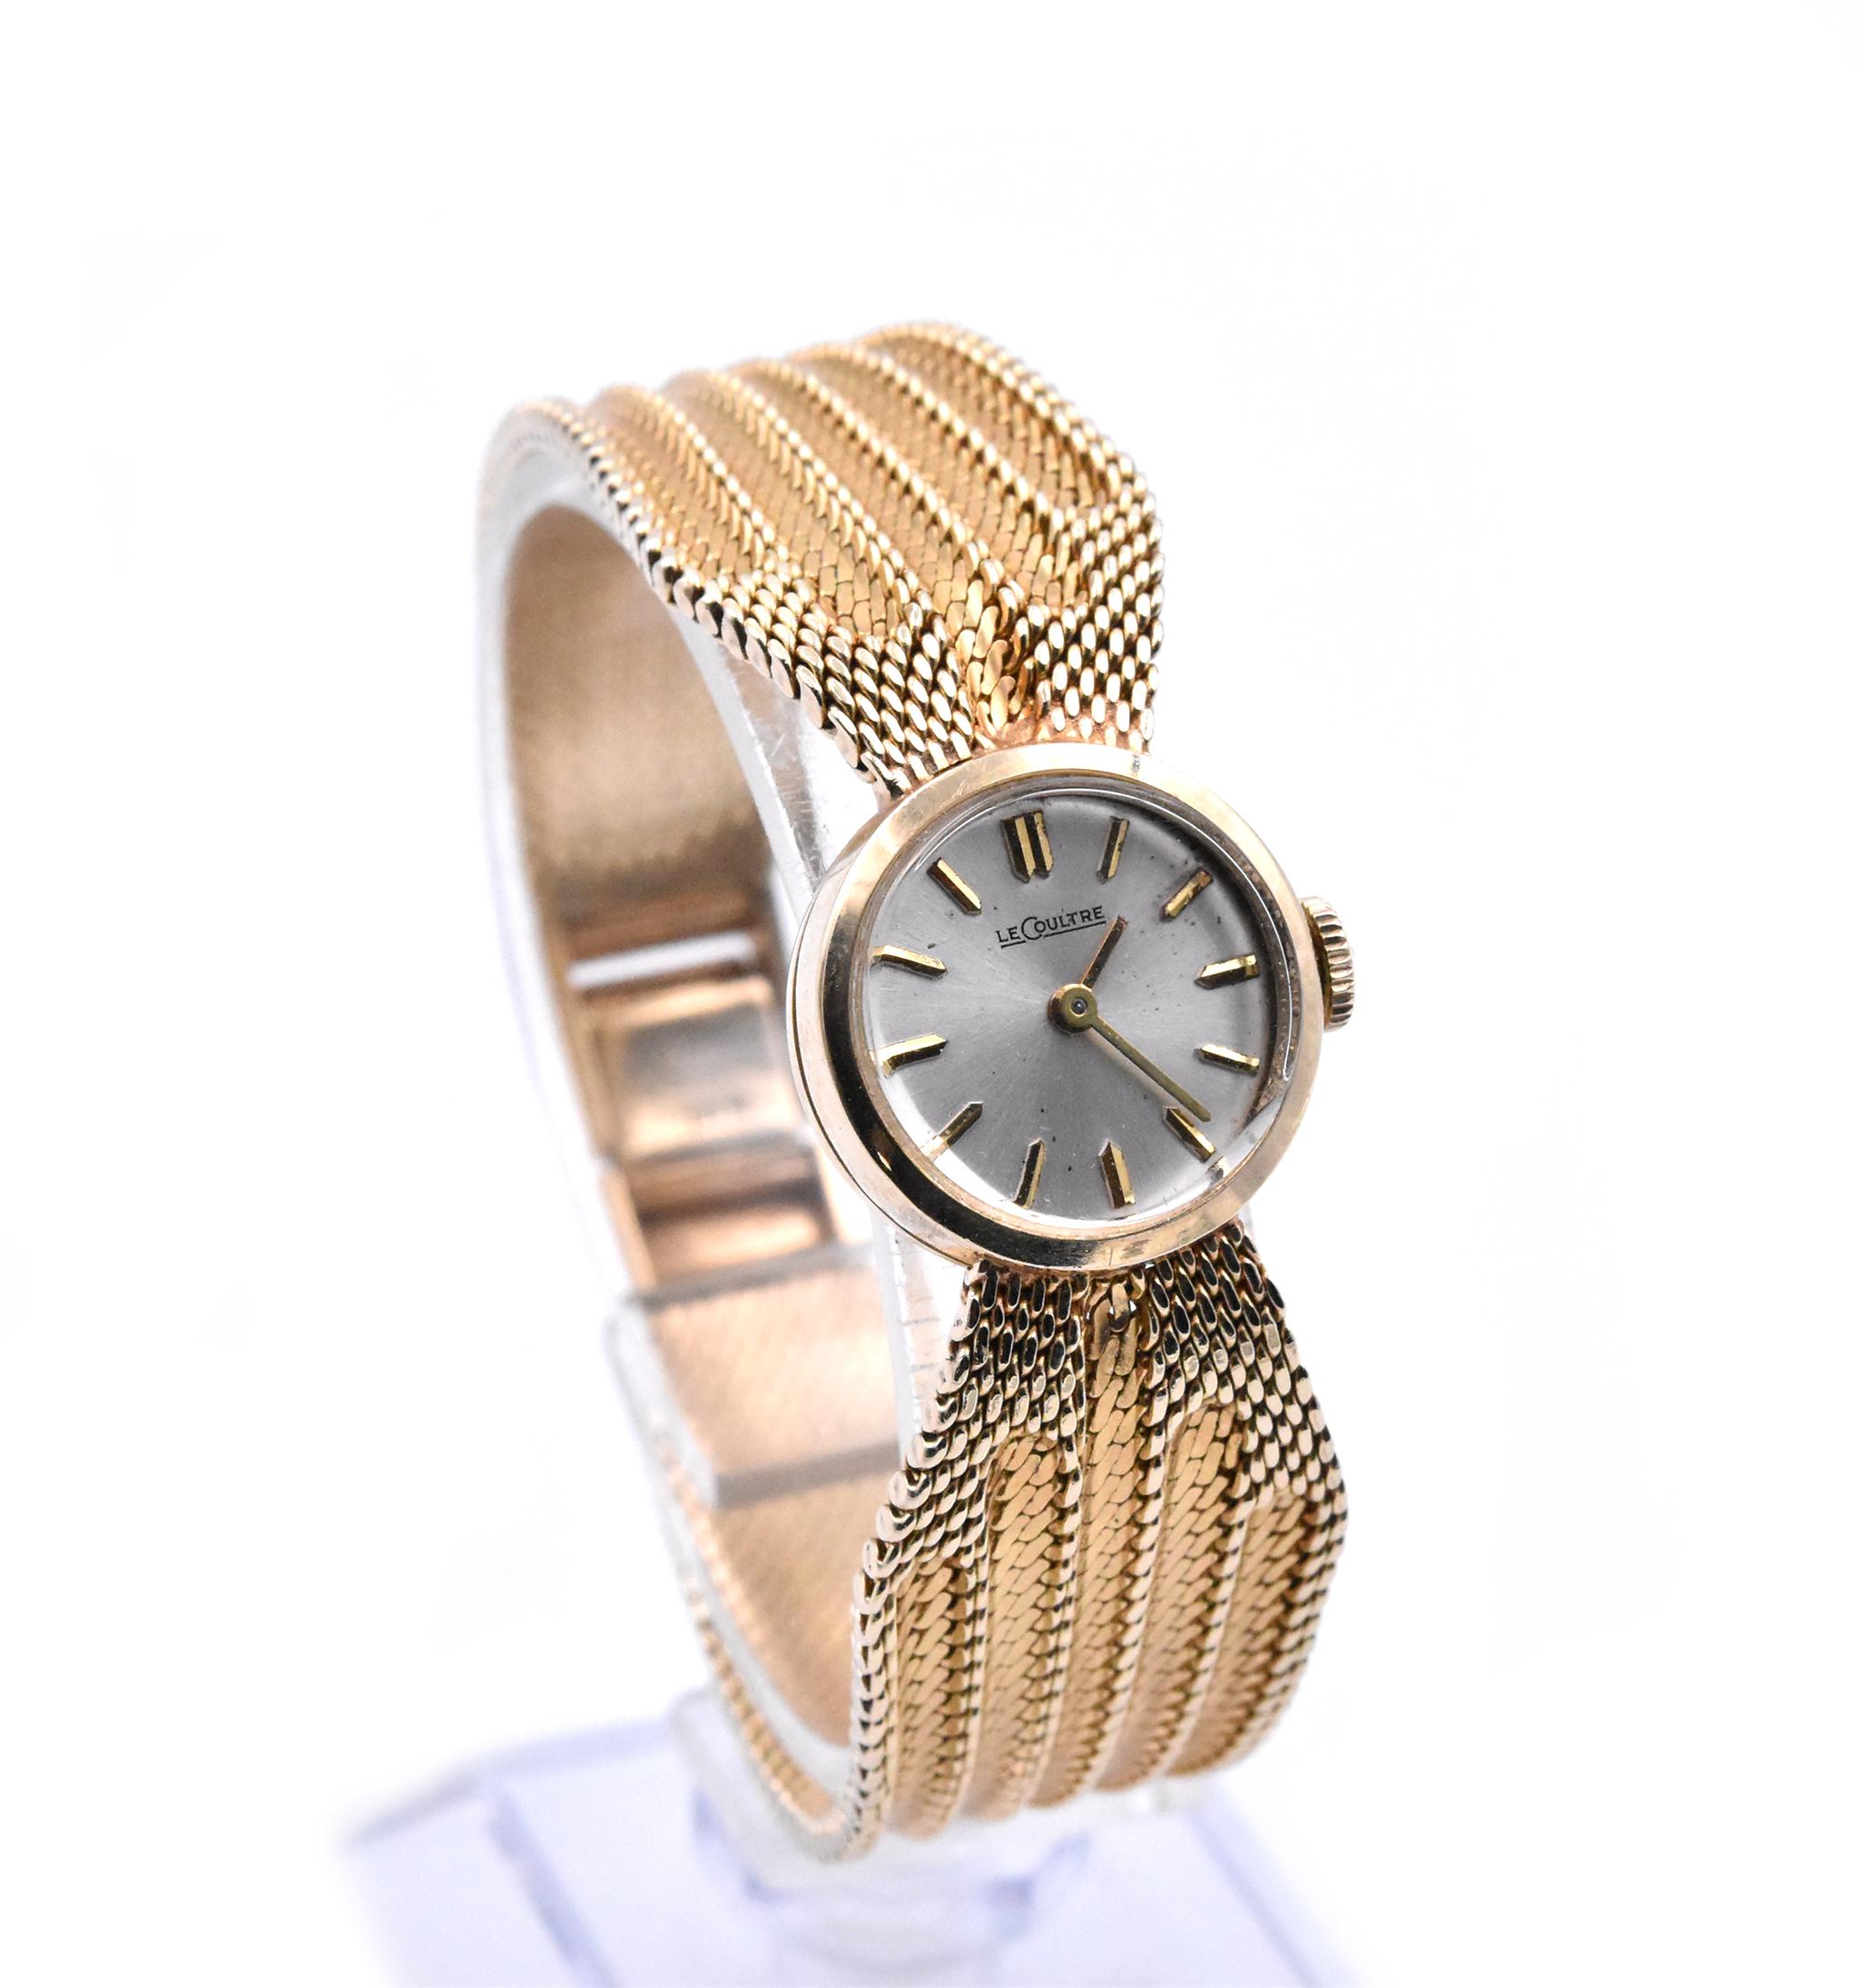 Movement: Manual Wind
Function: hours, minutes
Case: 17.5mm yellow gold circular case, push/pull crown
Dial: silver dial with gold hands and stick hour markers
Band: 14k yellow gold mesh bracelet with a locking clasp
Weight: 34.91 grams

Does not